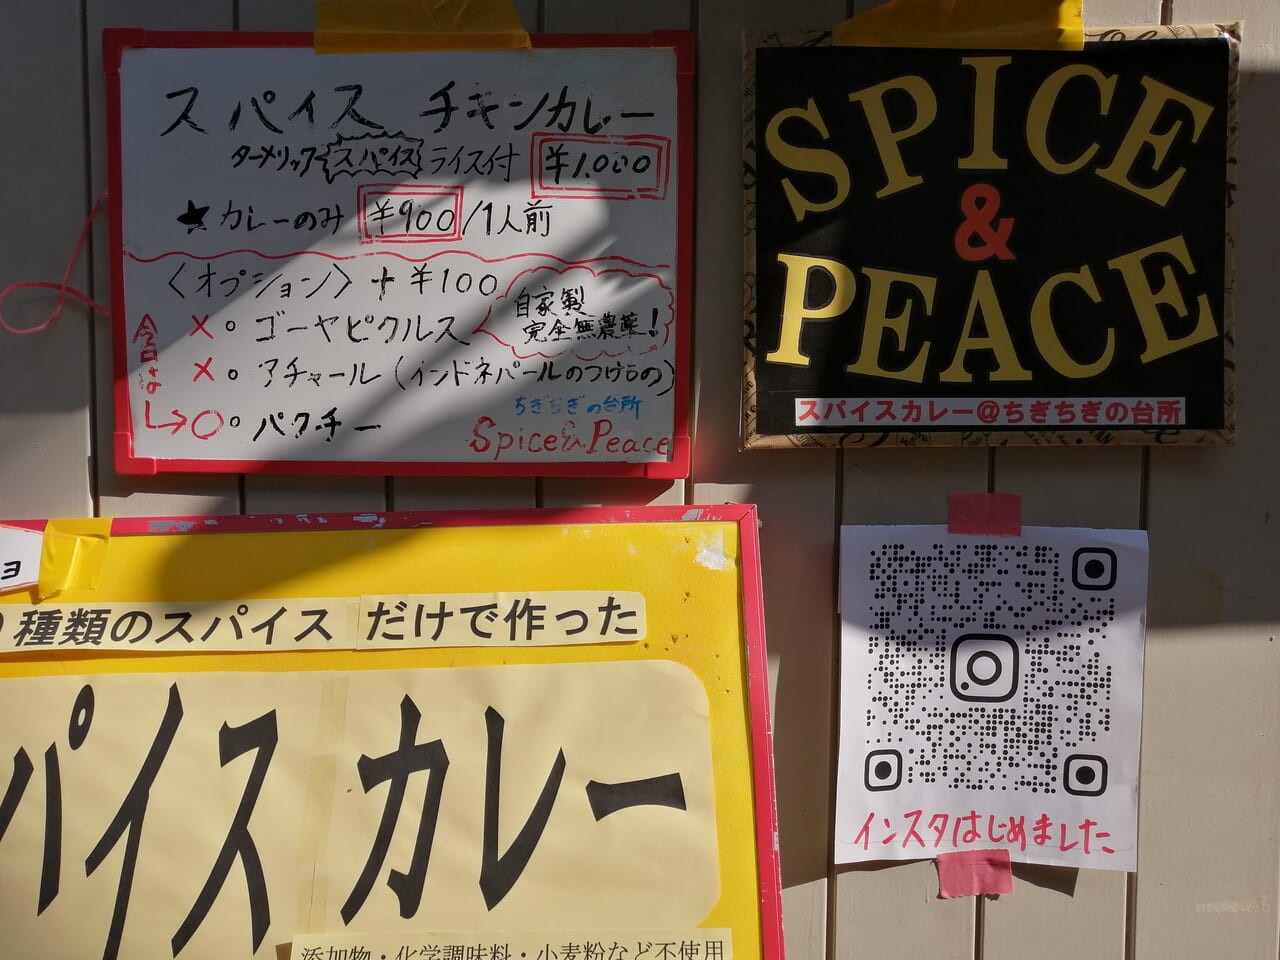 SPICE & PEACE ちぎちぎの台所